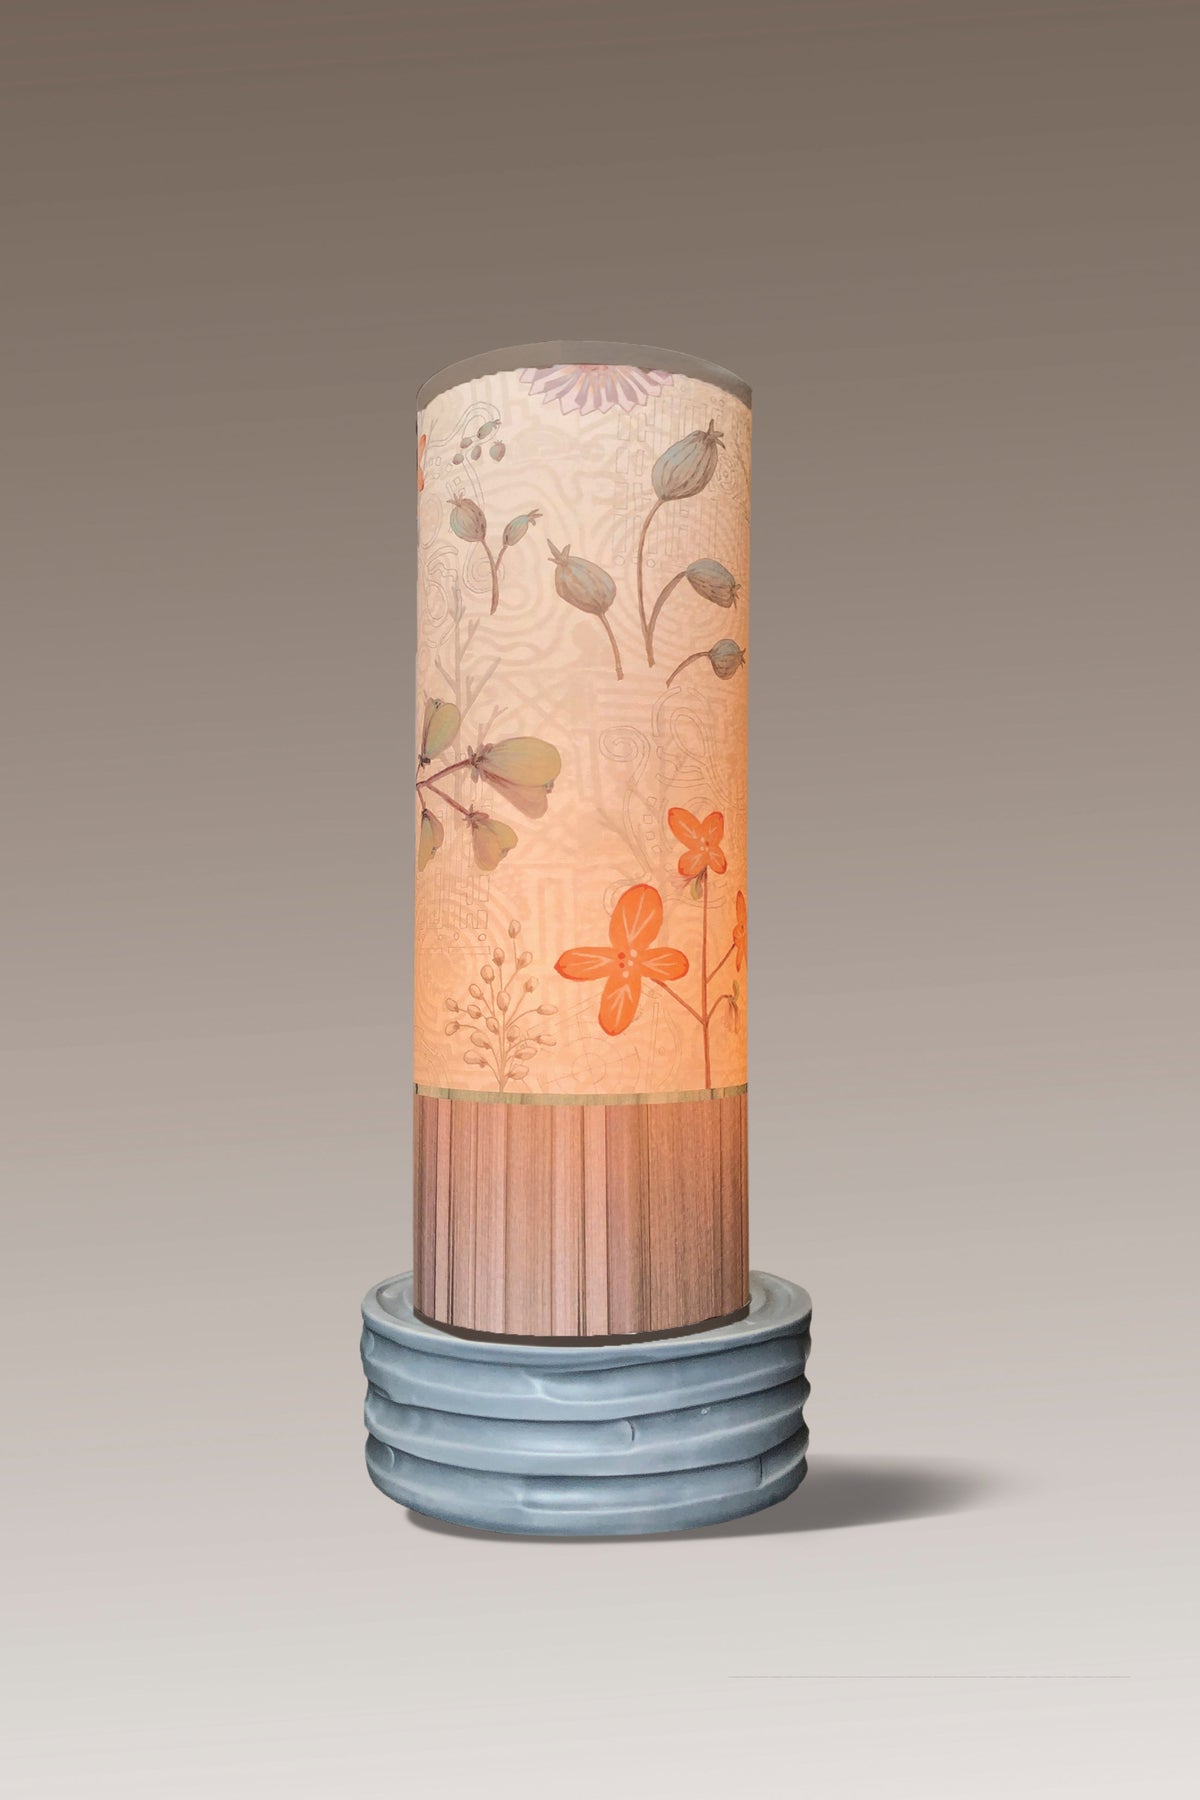 Janna Ugone &amp; Co Luminaires Ceramic Luminaire Accent Lamp with Flora and Maze Shade